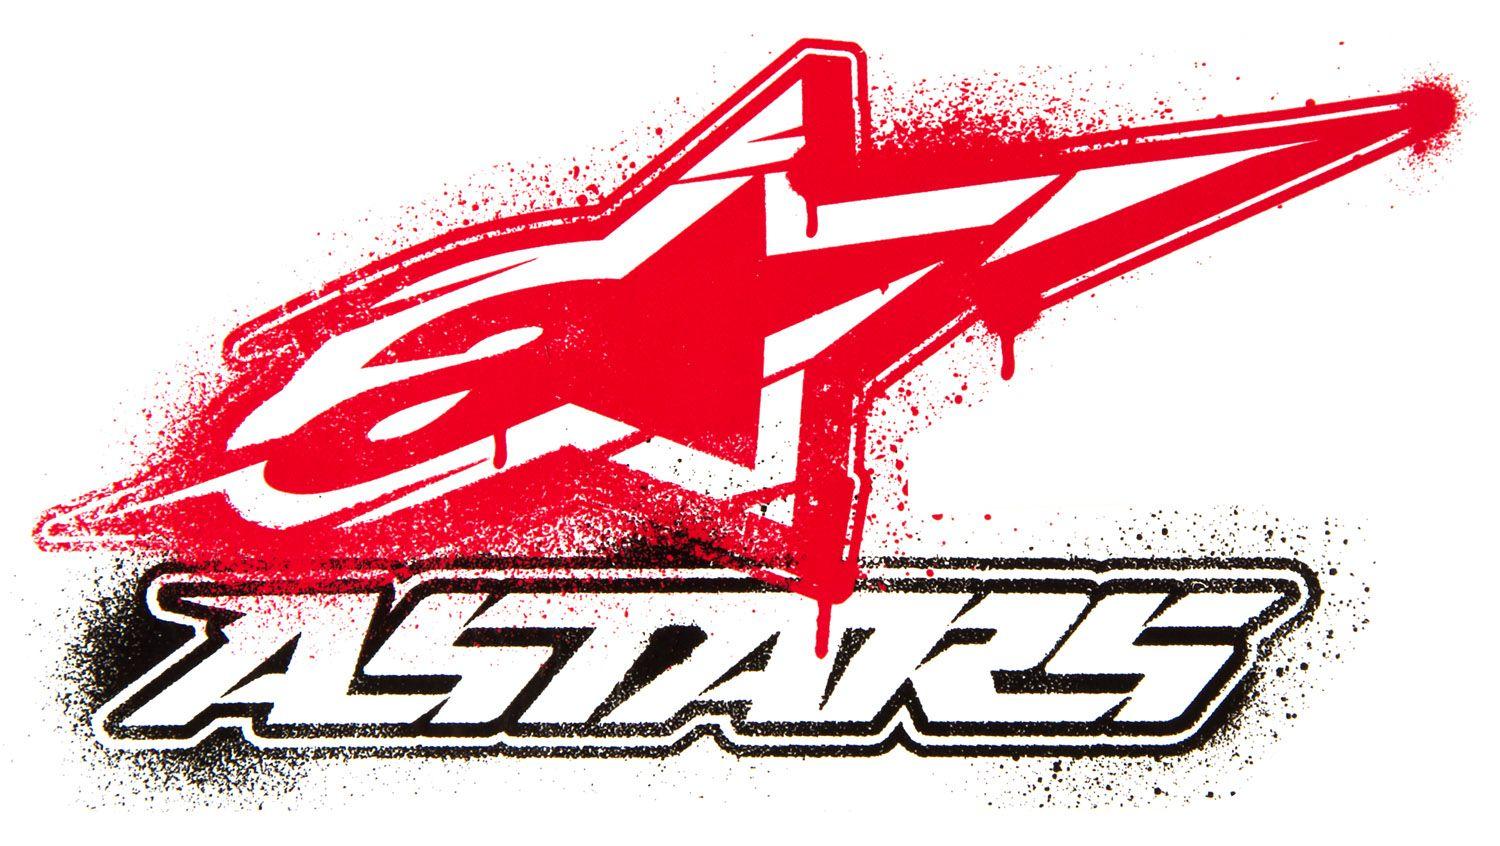 List of Synonyms and Antonyms of the Word: Alpinestars Wallpaper